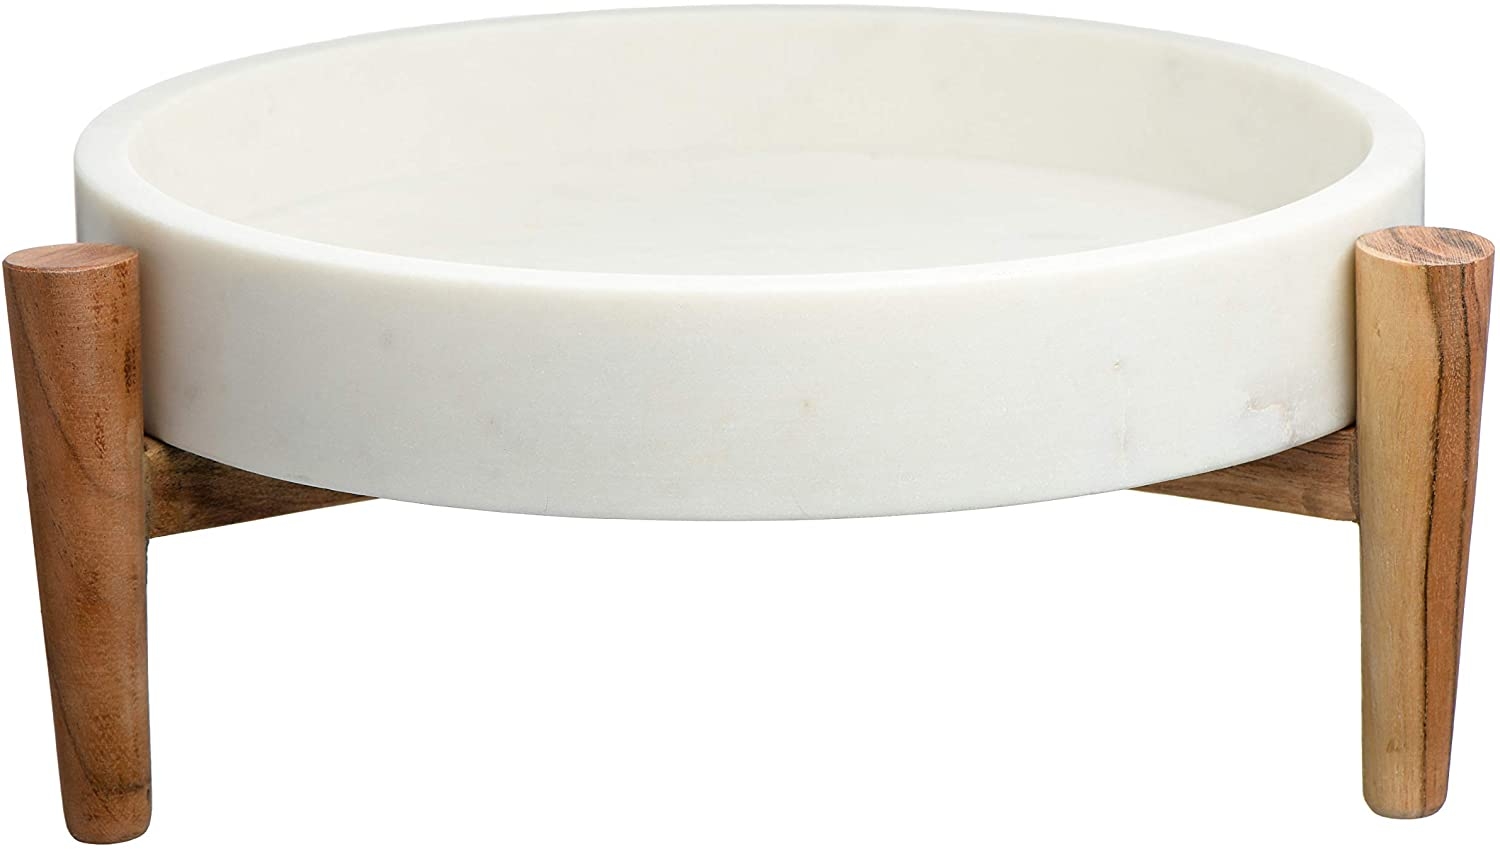 White Marble Tray with Wood Stand, 2 Piece Set - Image 2